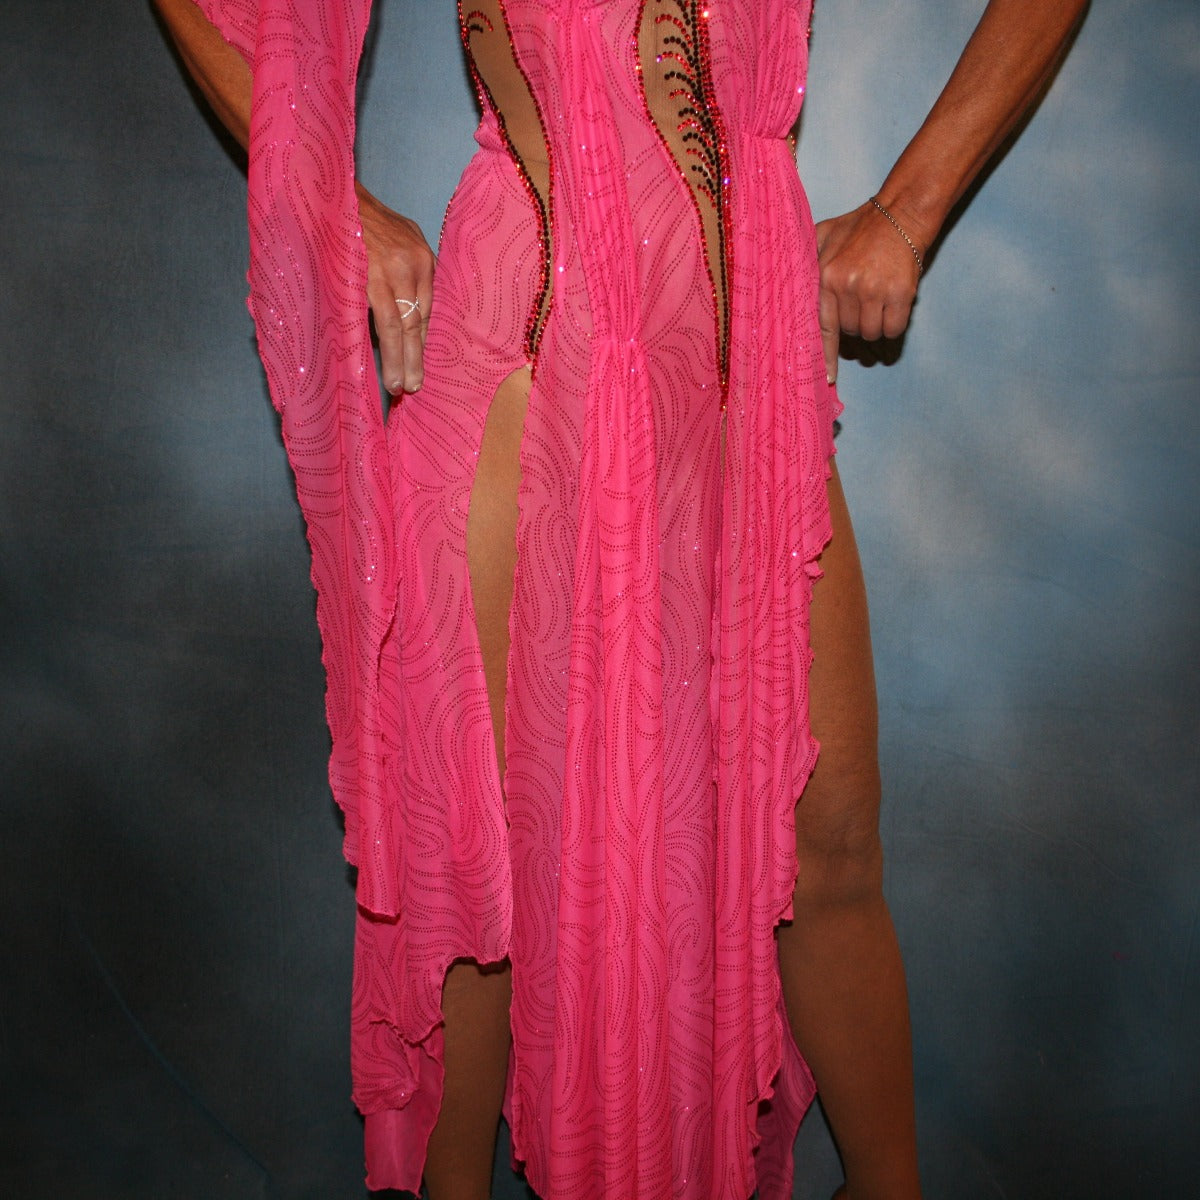 Crystal's Creations close up bottom view of Pink Latin/rhythm dress created of sheer swirls glitterknit on nude illusion base has the look of a Greek Goddess & is embellished with Swarovski stonework in Indian pink & bronze.